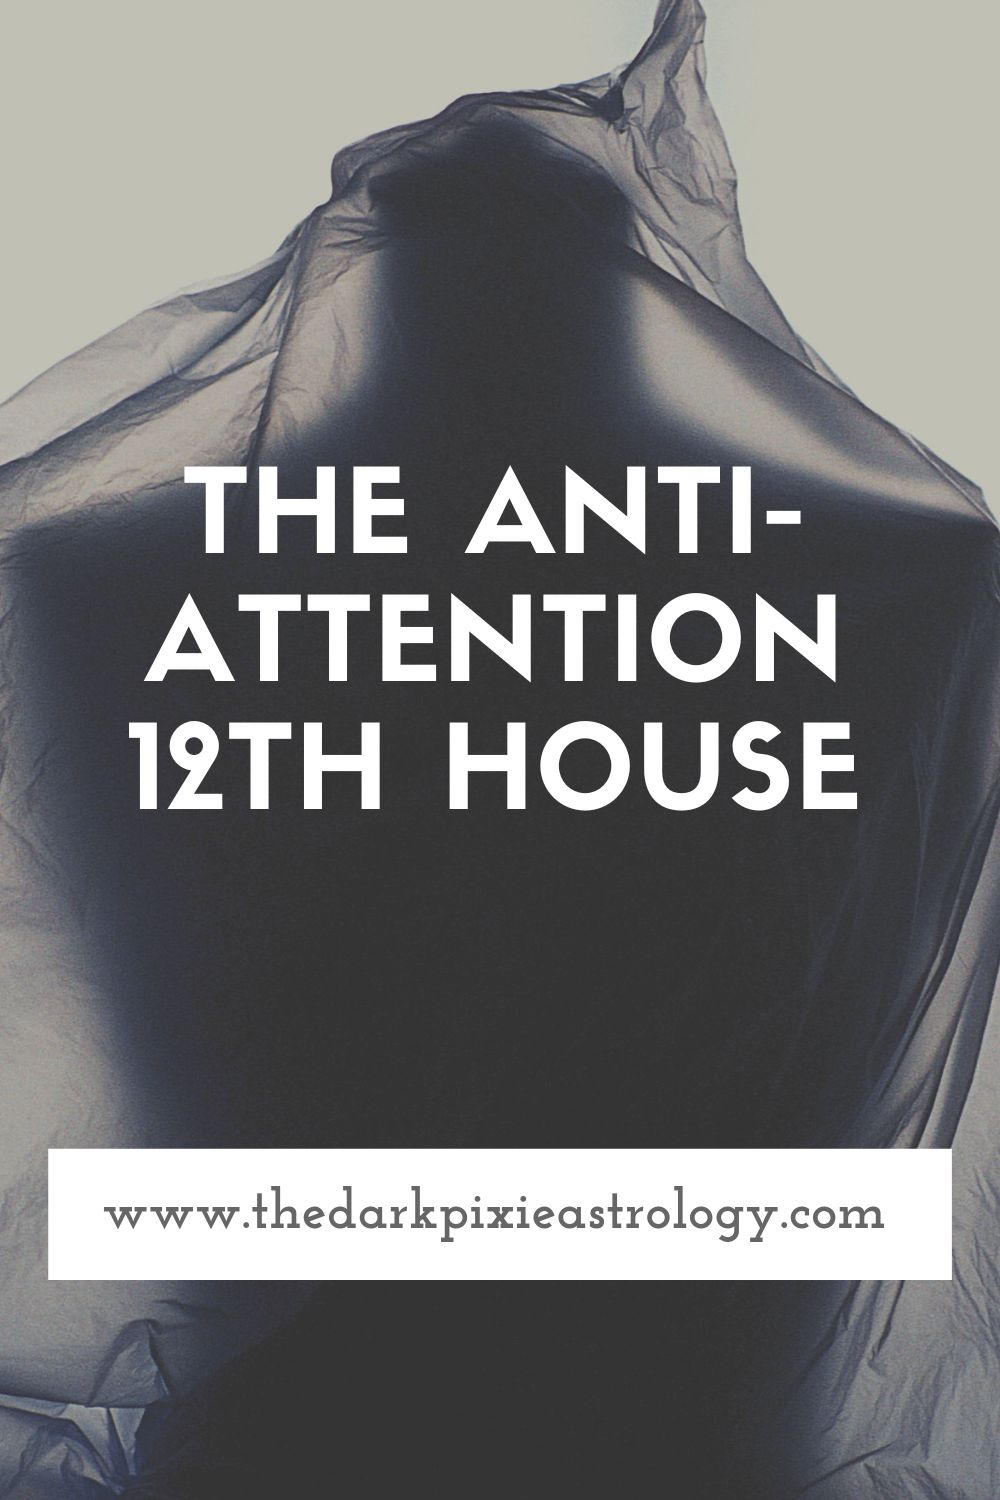 The Anti-Attention 12th House - The Dark Pixie Astrology